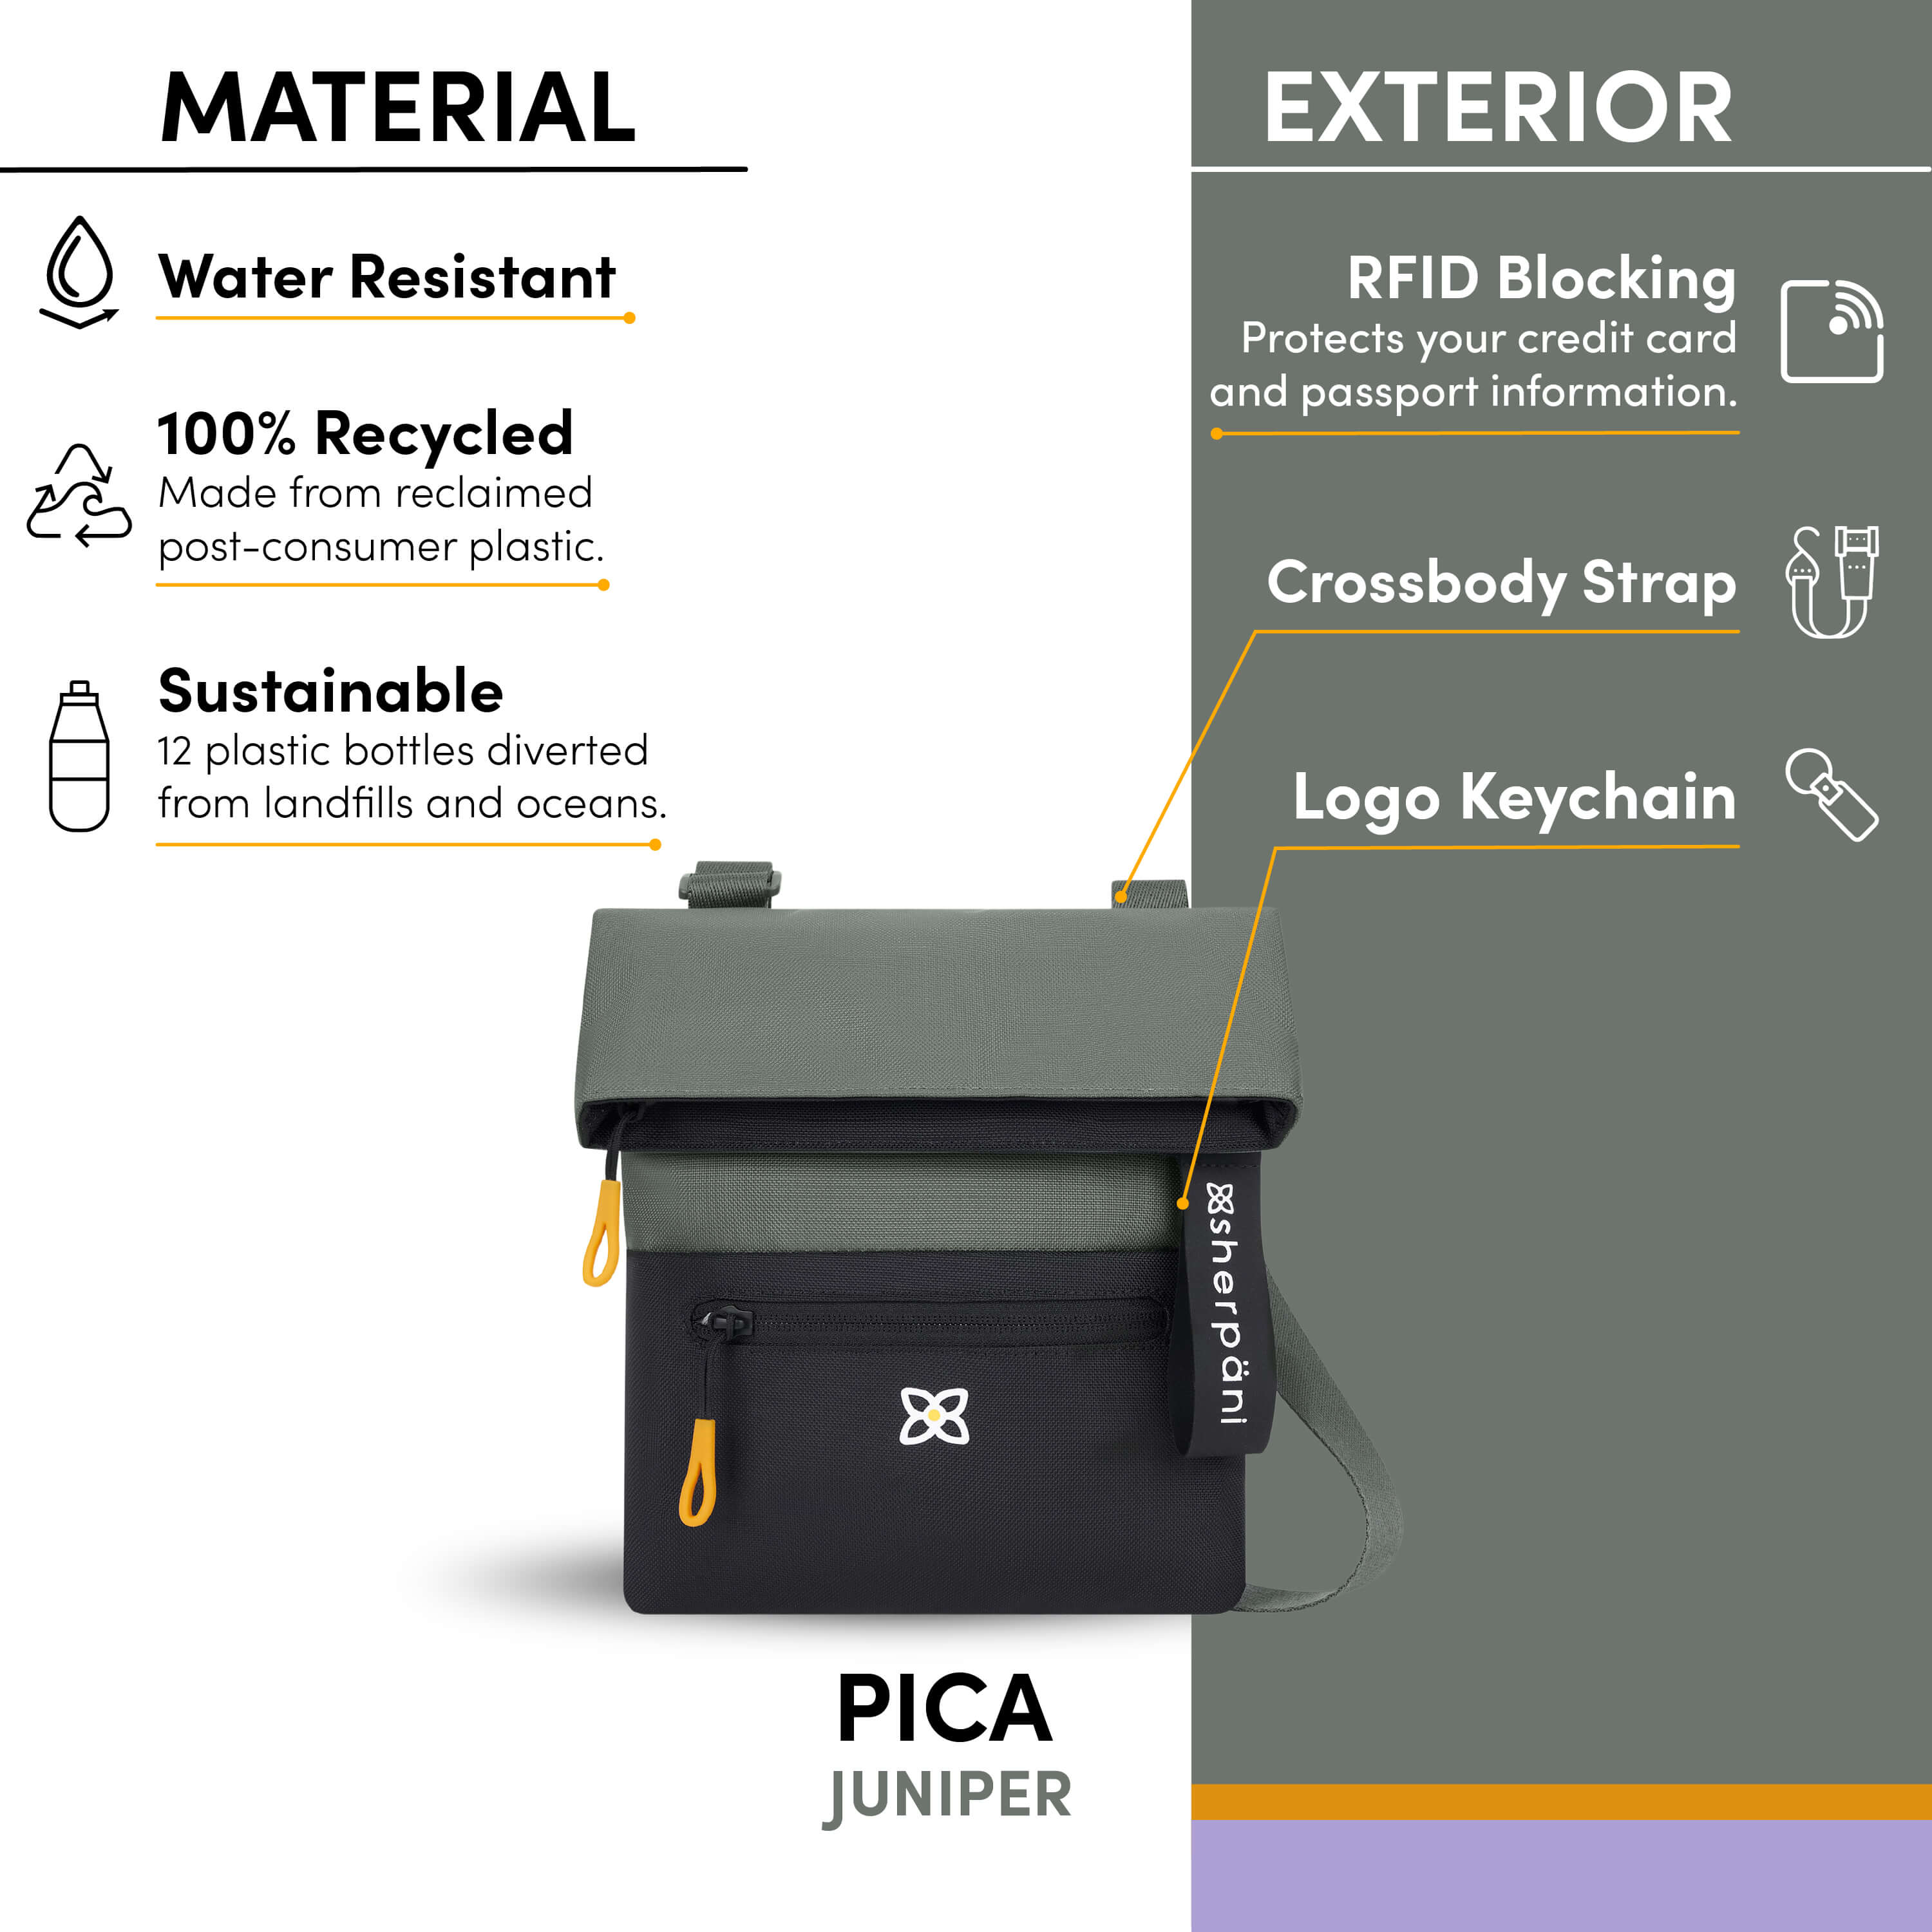 Graphic showing the features of Sherpani crossbody travel purse, the Pica. Features include water-resistant material, made from recycled materials, RFID protection, adjustable crossbody strap and Sherpani logo keychain.